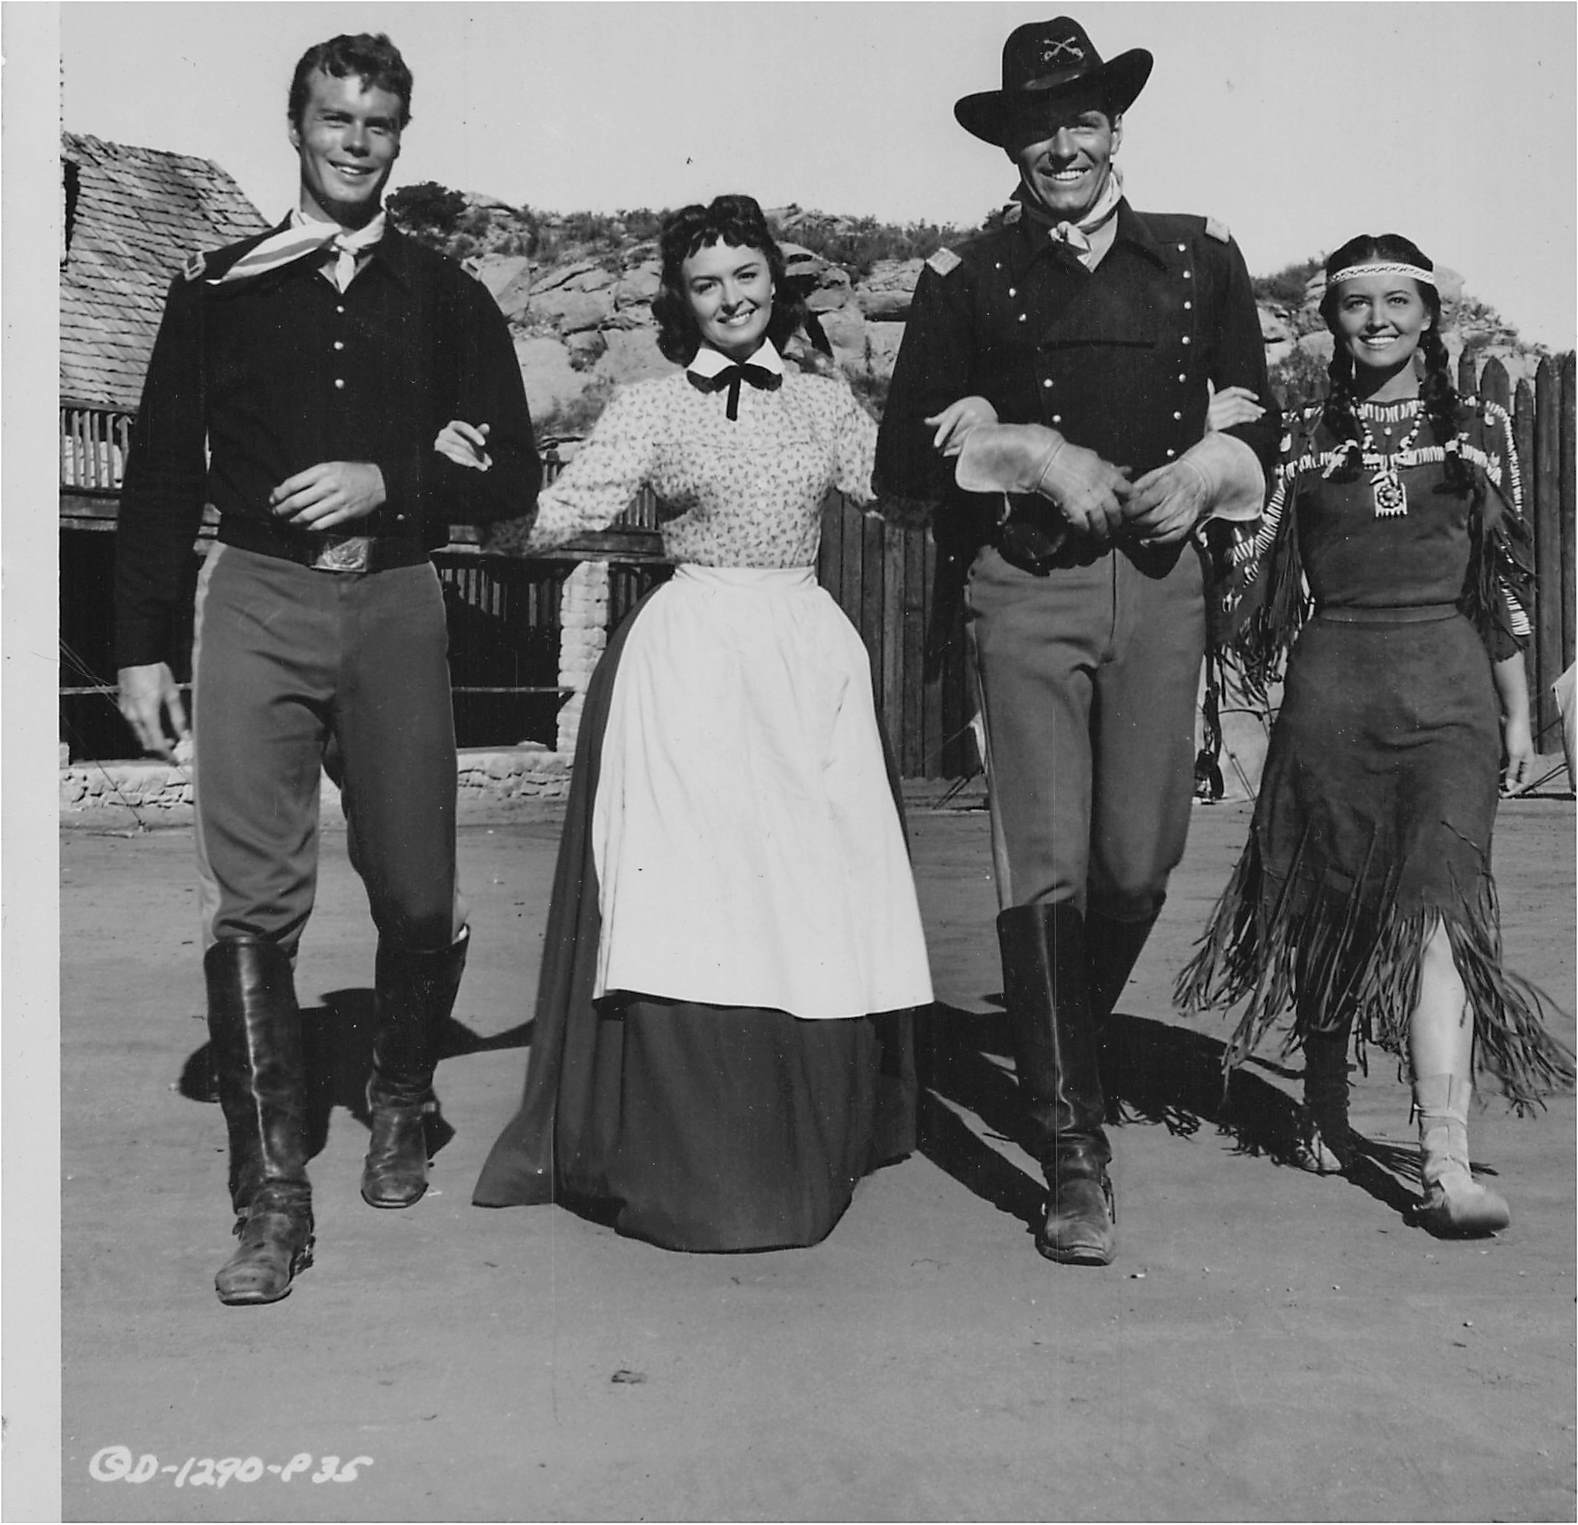   They Rode West   Filming: Nov. 17-Dec. 7, 1953  Opening: Los Angeles, Nov. 10, 1954   Promotional photo of Bob, Donna Reed, Phil Carey, May Wynn on location. Columbia Pictures   